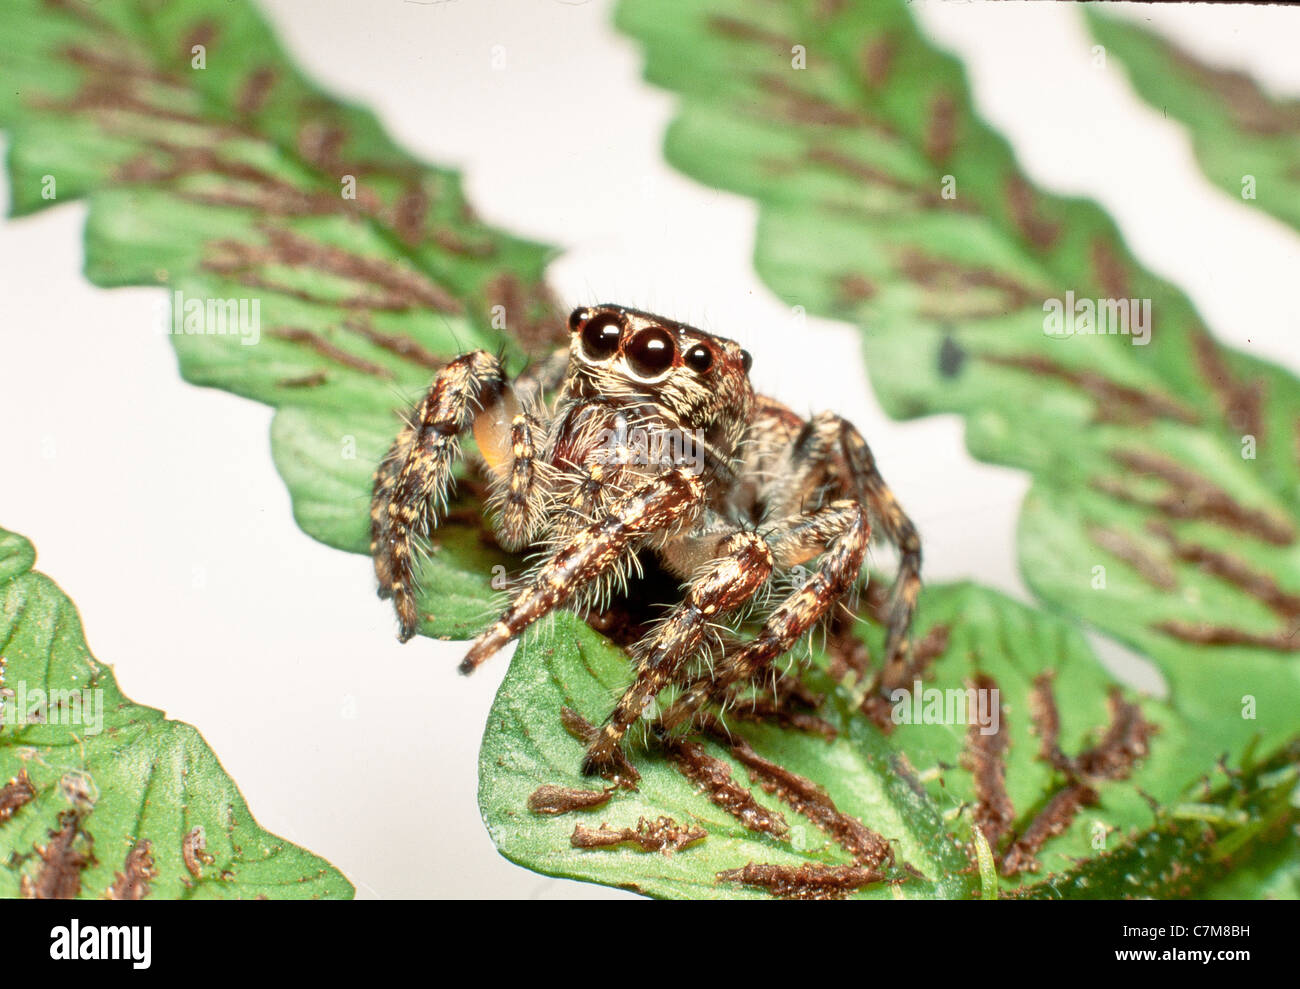 Jumping spider on the rear of a fern leaf showing spores sporangia, Mulu National Park, Sarawak, Borneo, East Malaysia Stock Photo